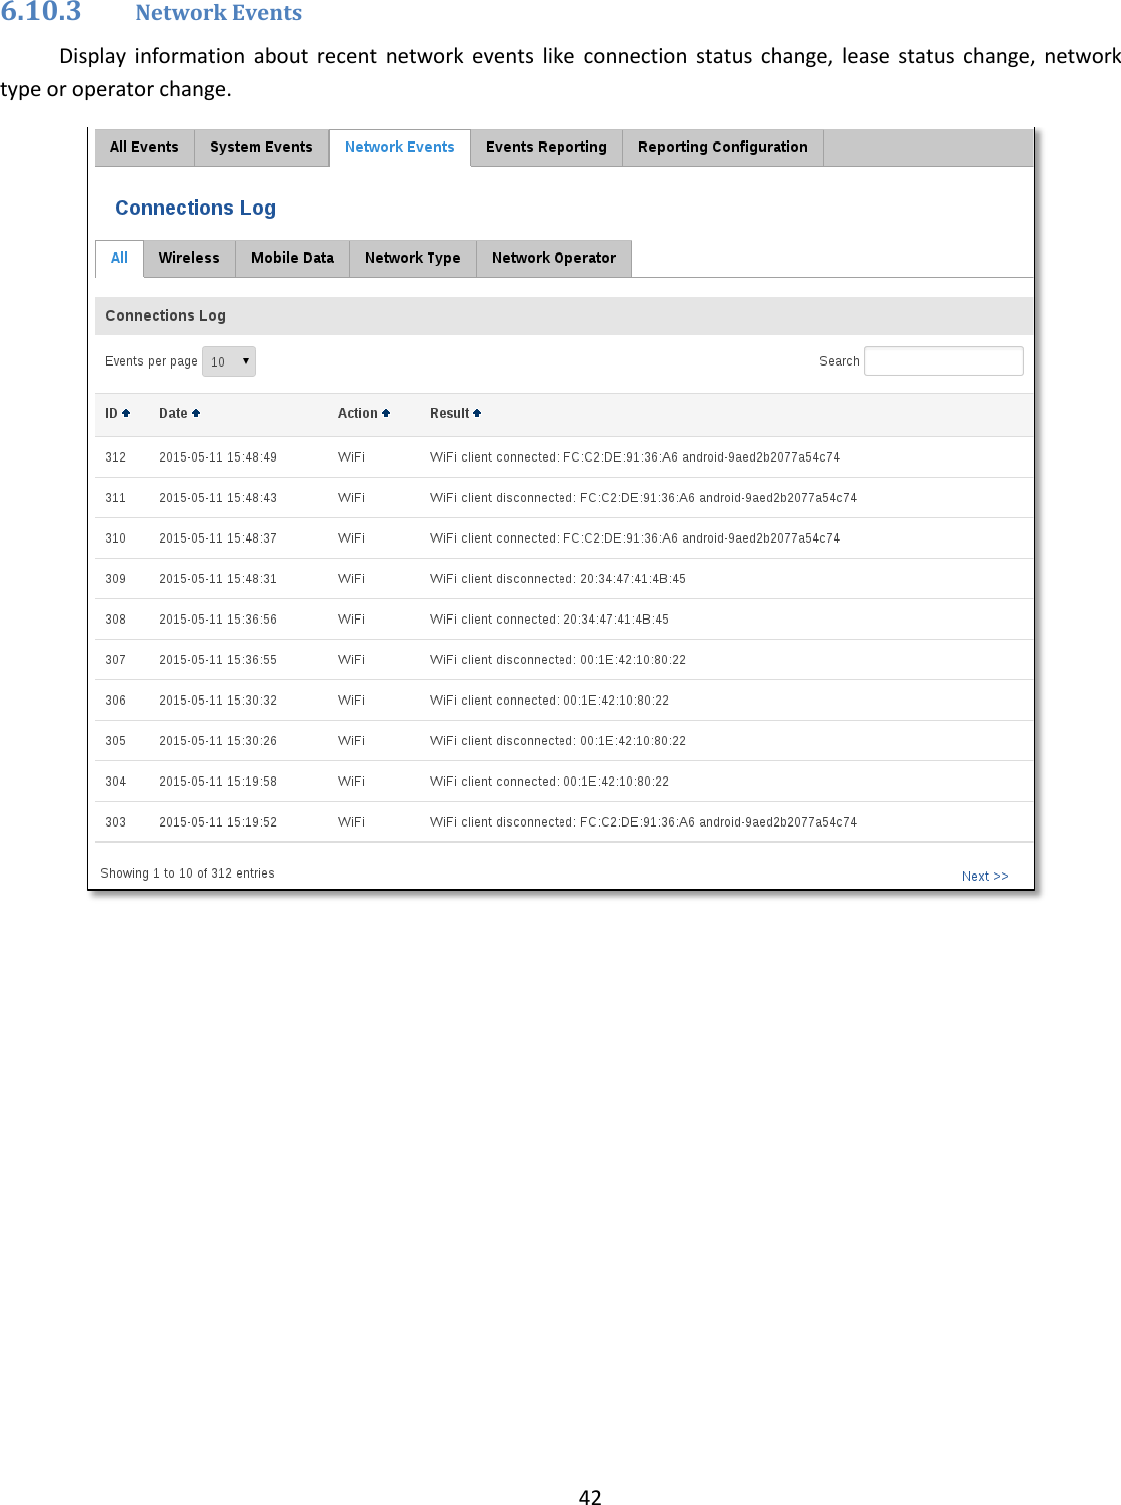  42  6.10.3 Network Events Display  information  about  recent  network  events  like  connection  status  change,  lease  status  change,  network type or operator change.      